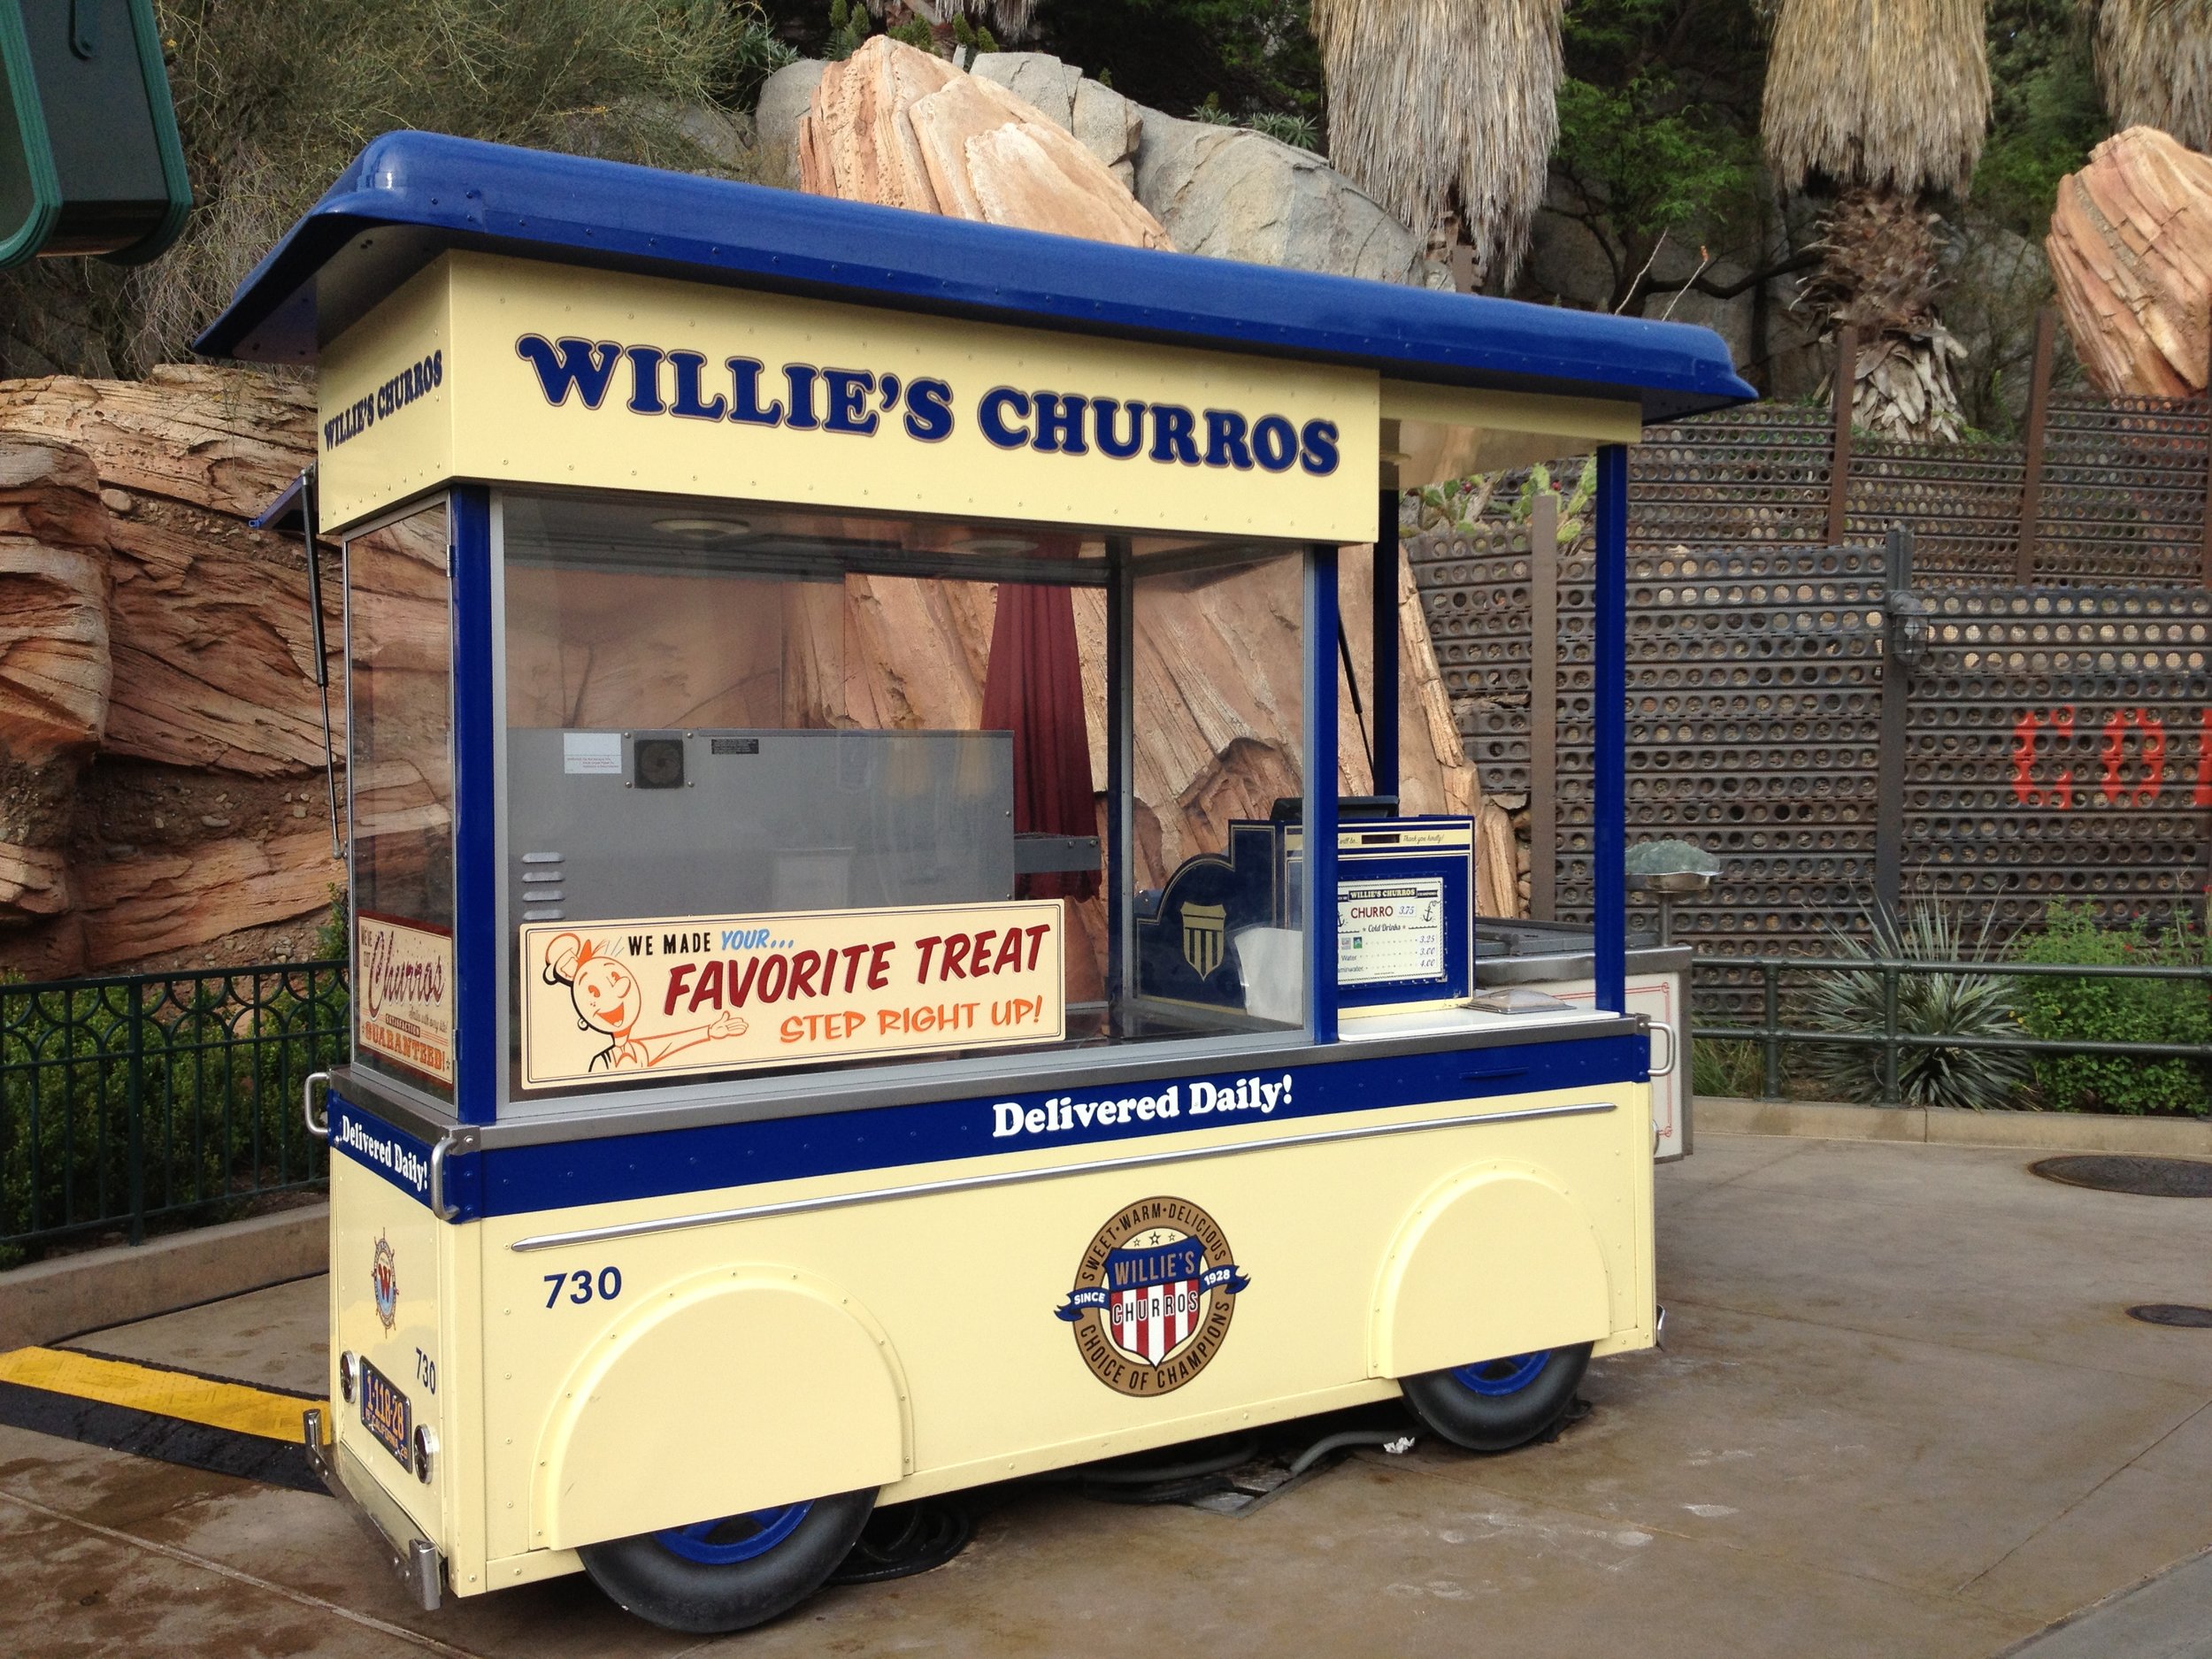   Specialty Retail Food Cart    Anaheim, CA    Learn More  